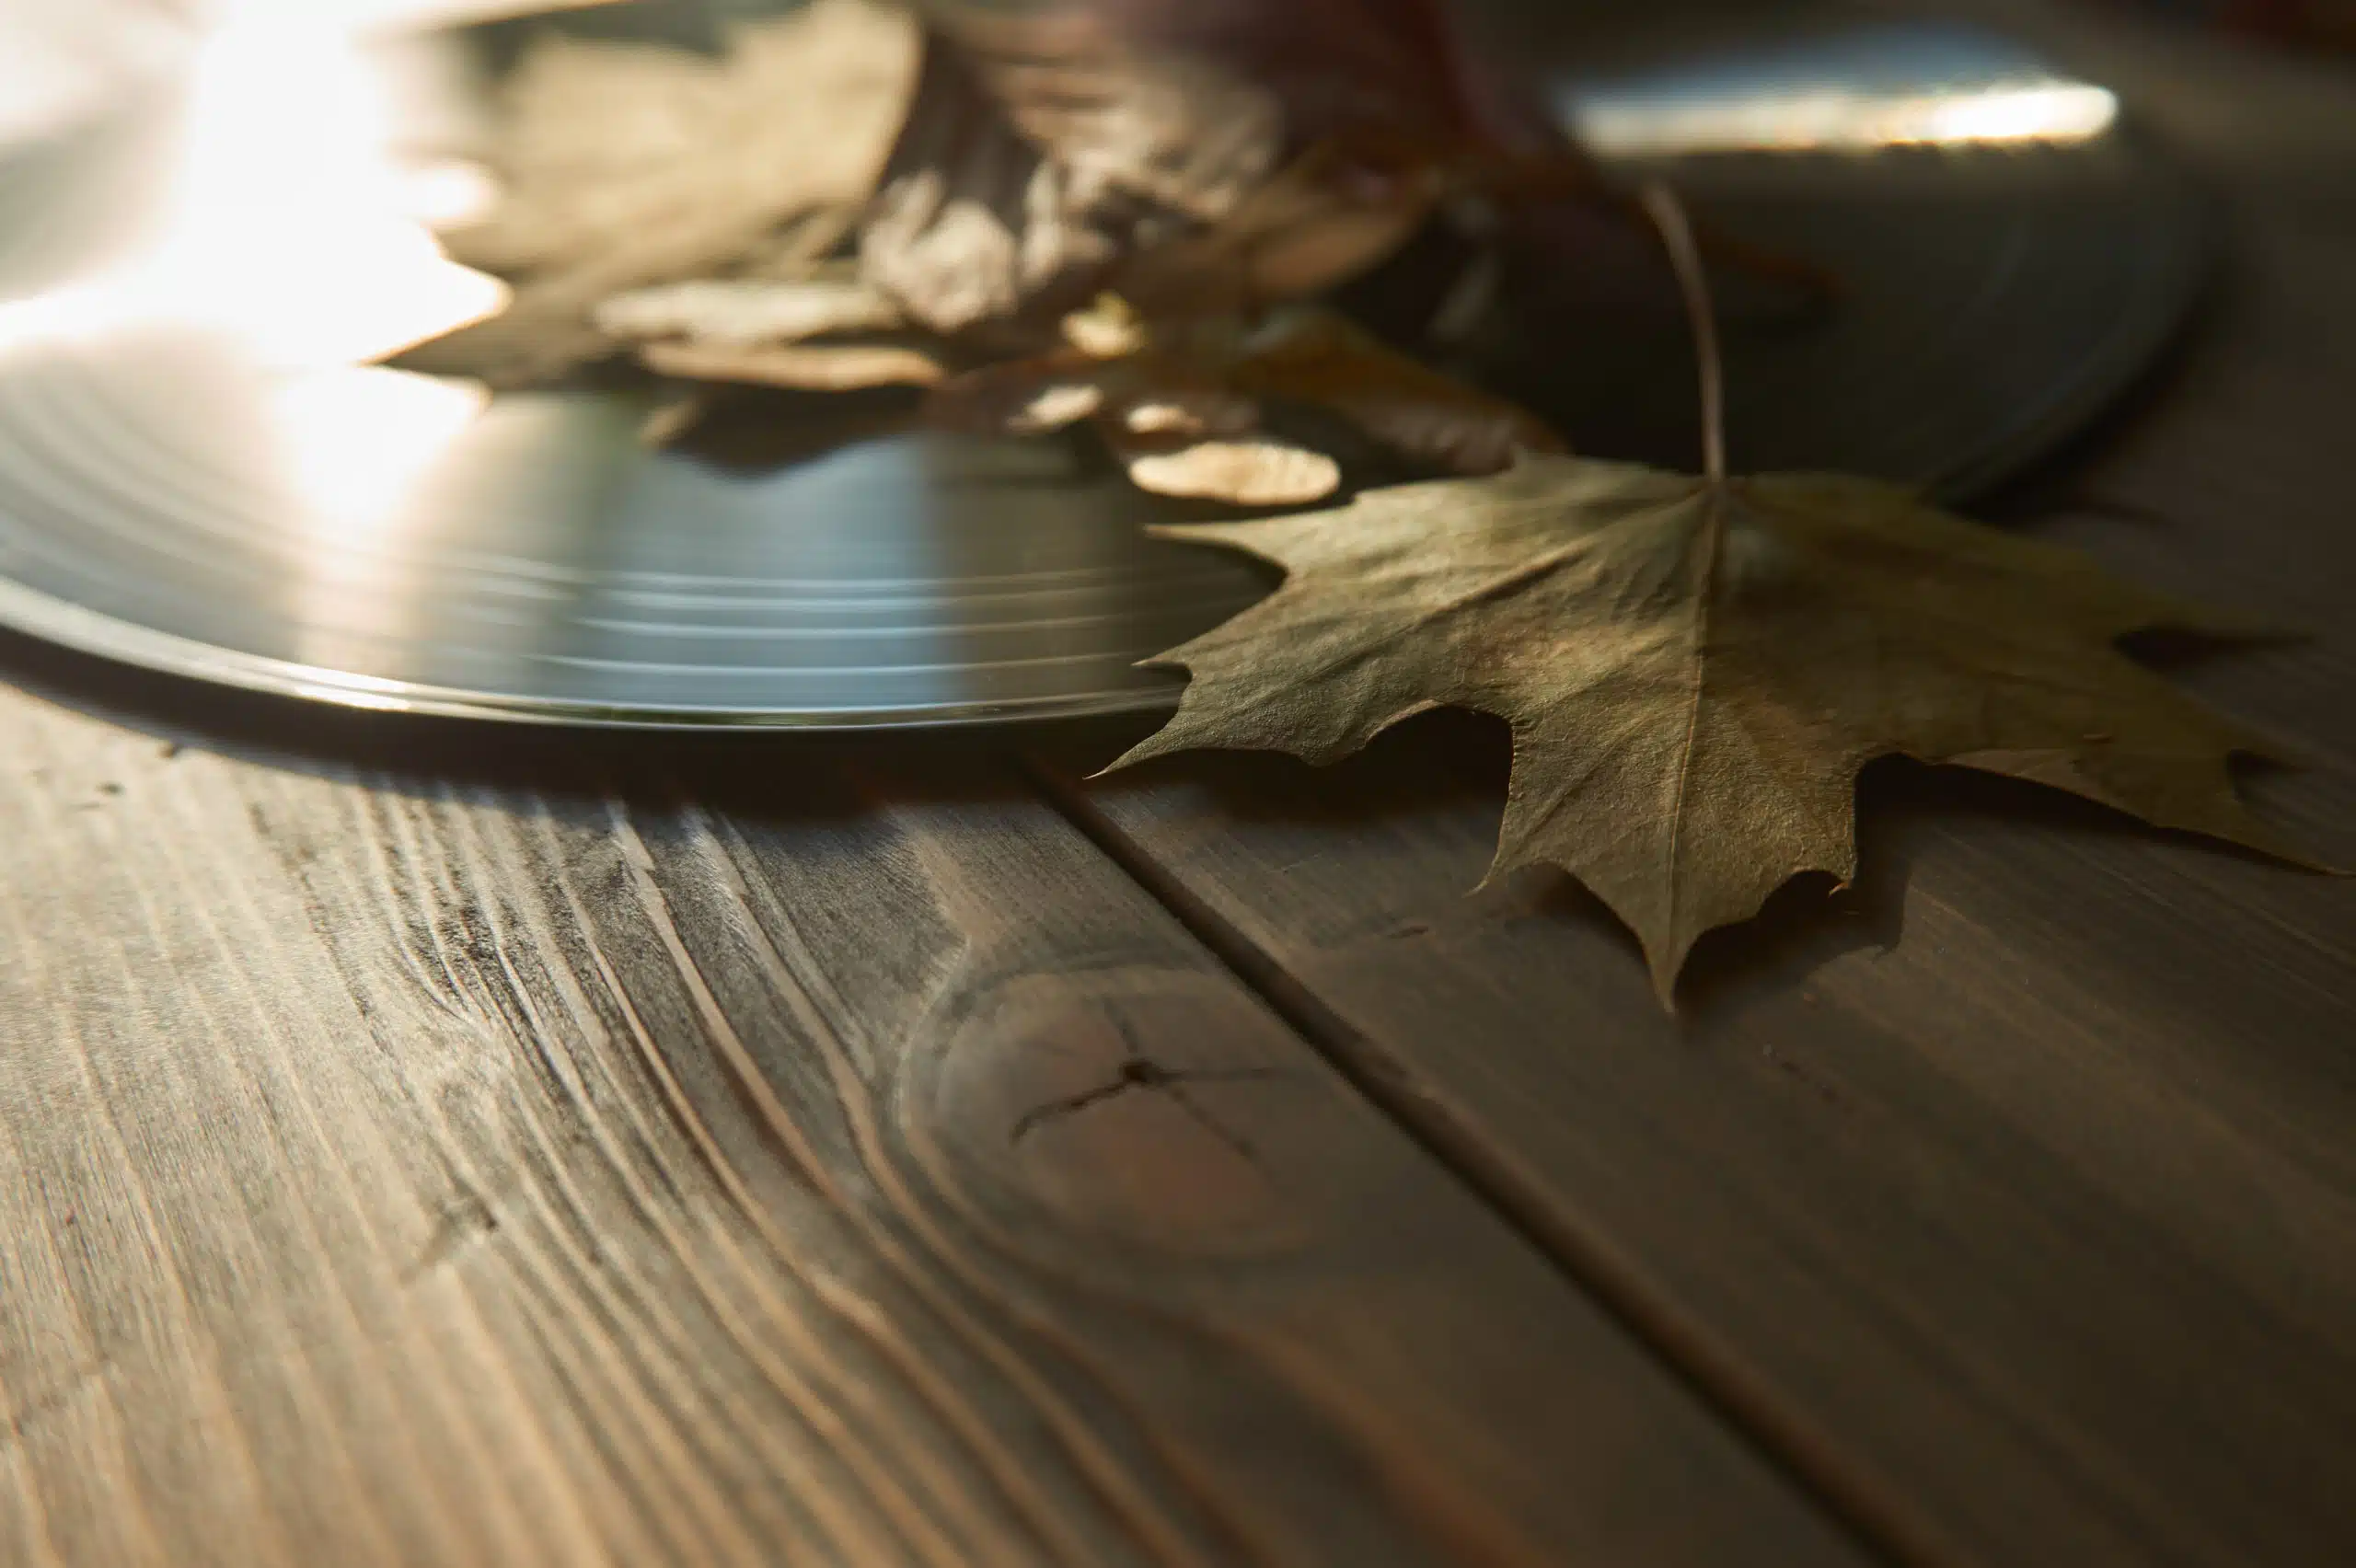 Vintage vinyl record and autumn leaves